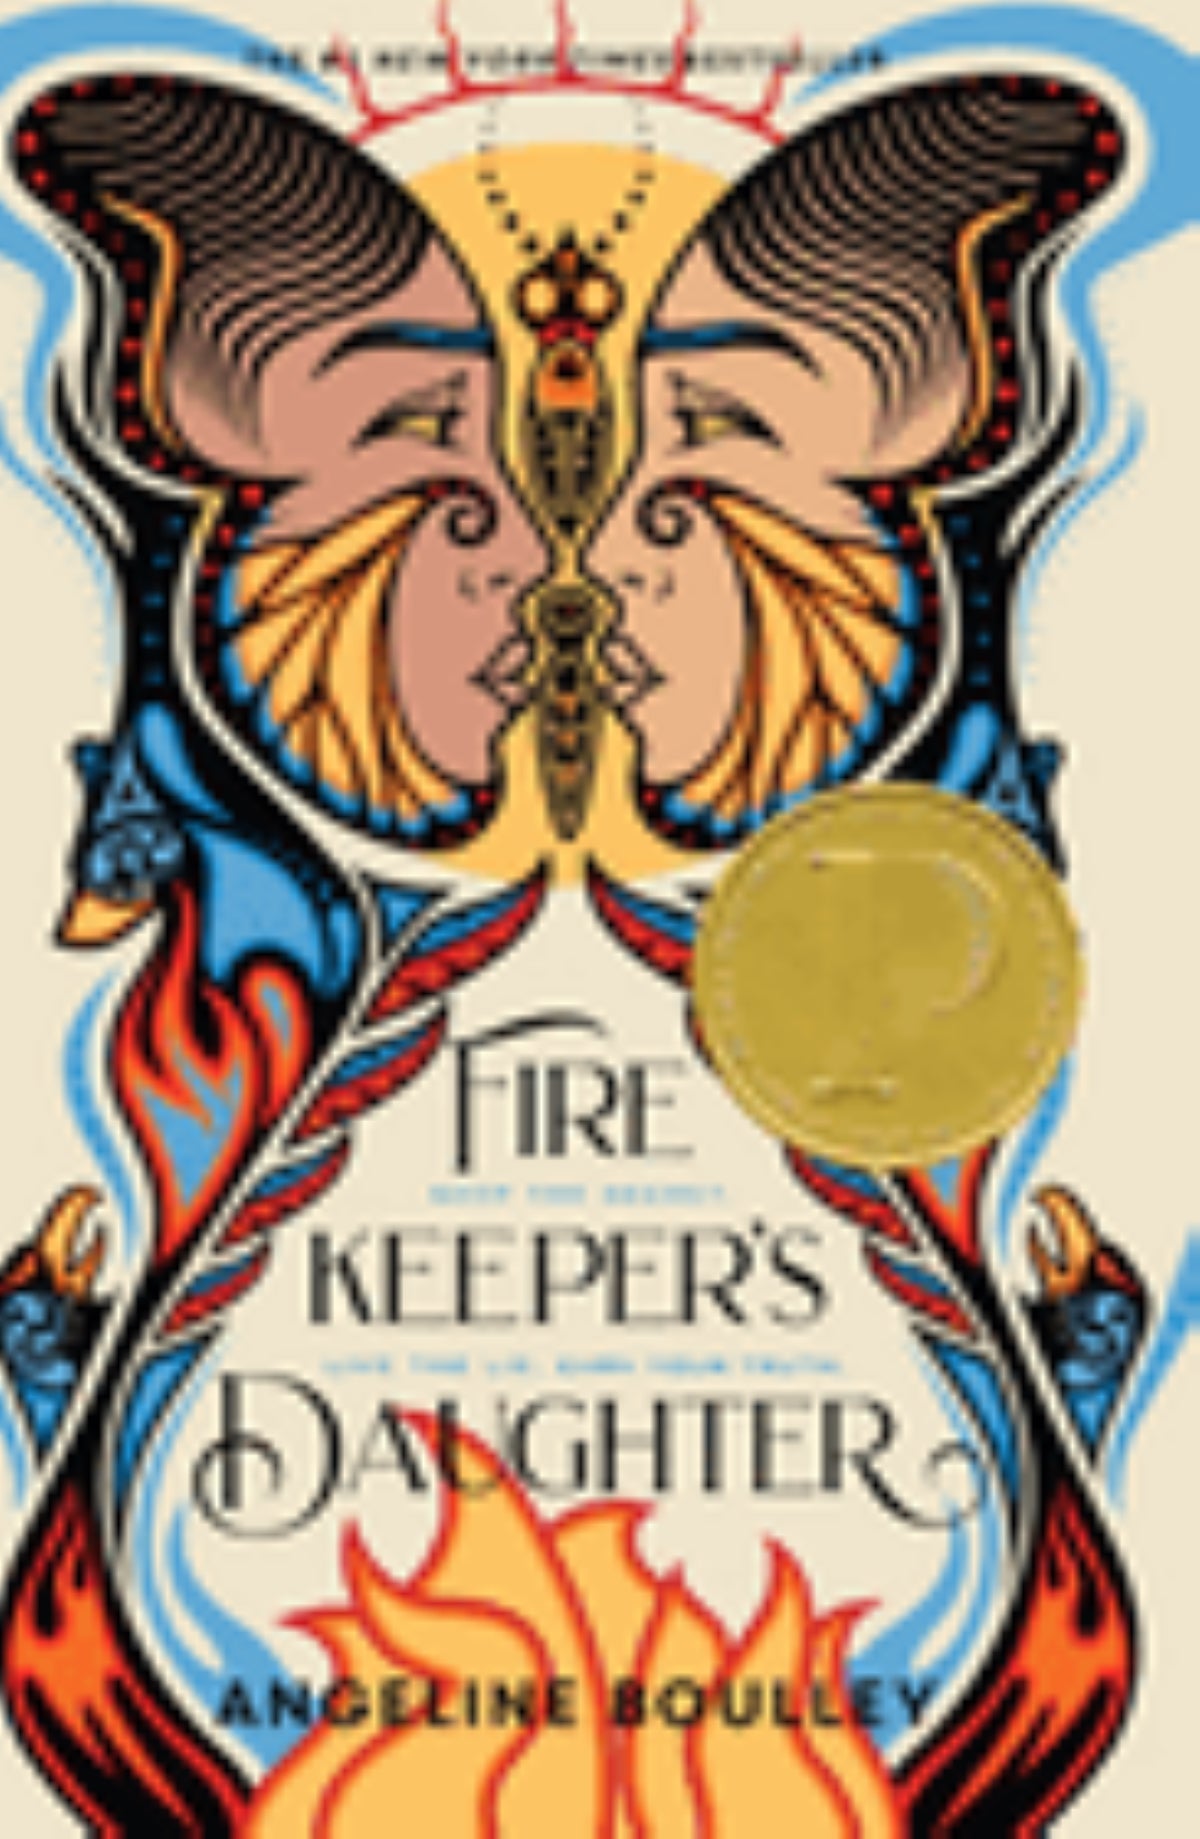 Fire Keeper's Daughter 
by Angeline Boulley